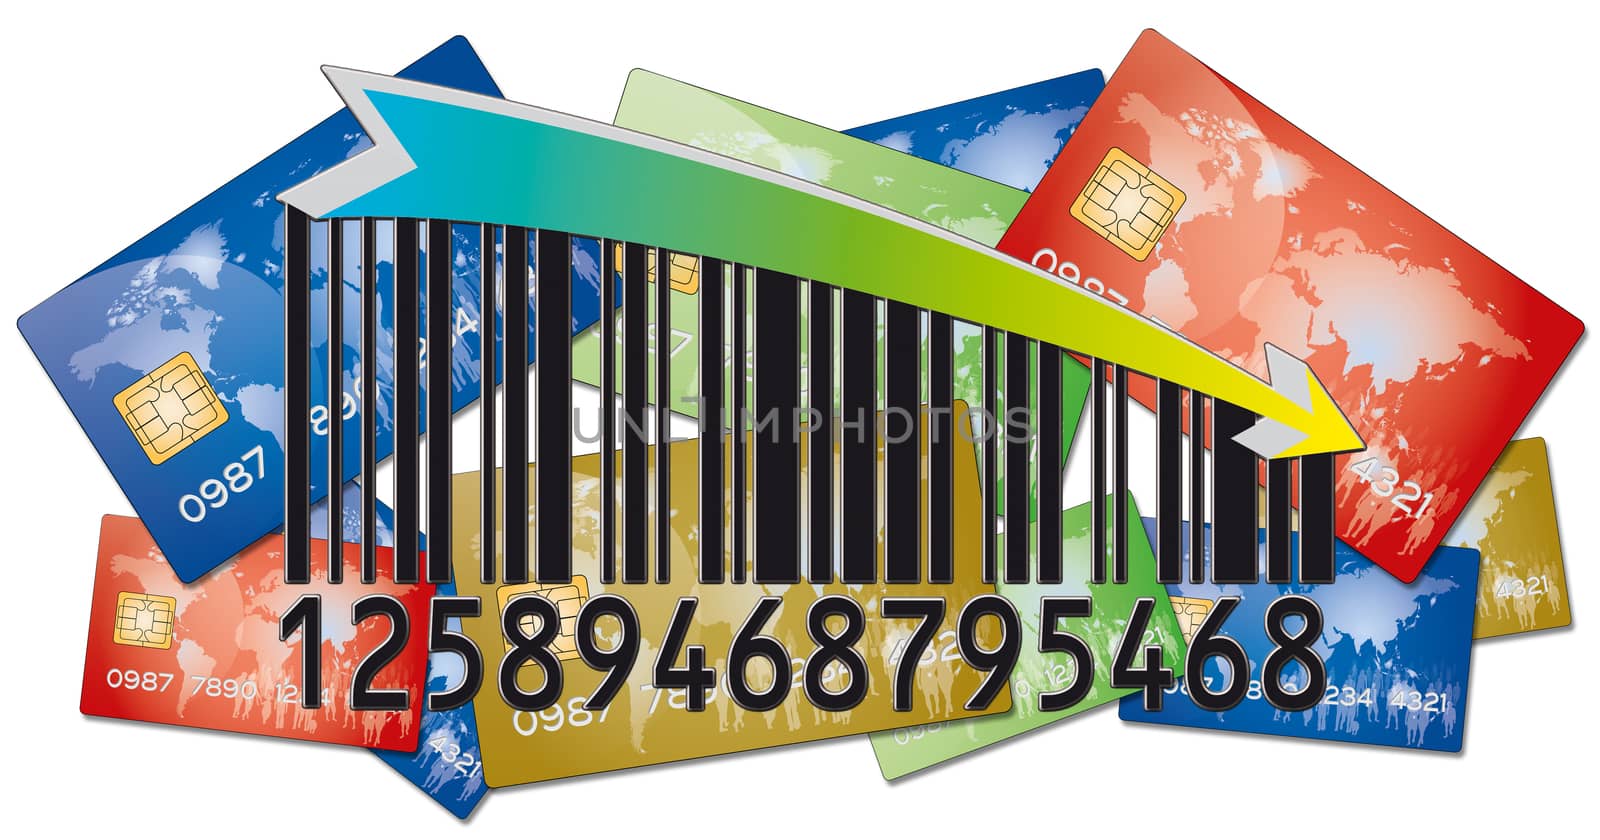 several bank credit cards for payment with a bar code